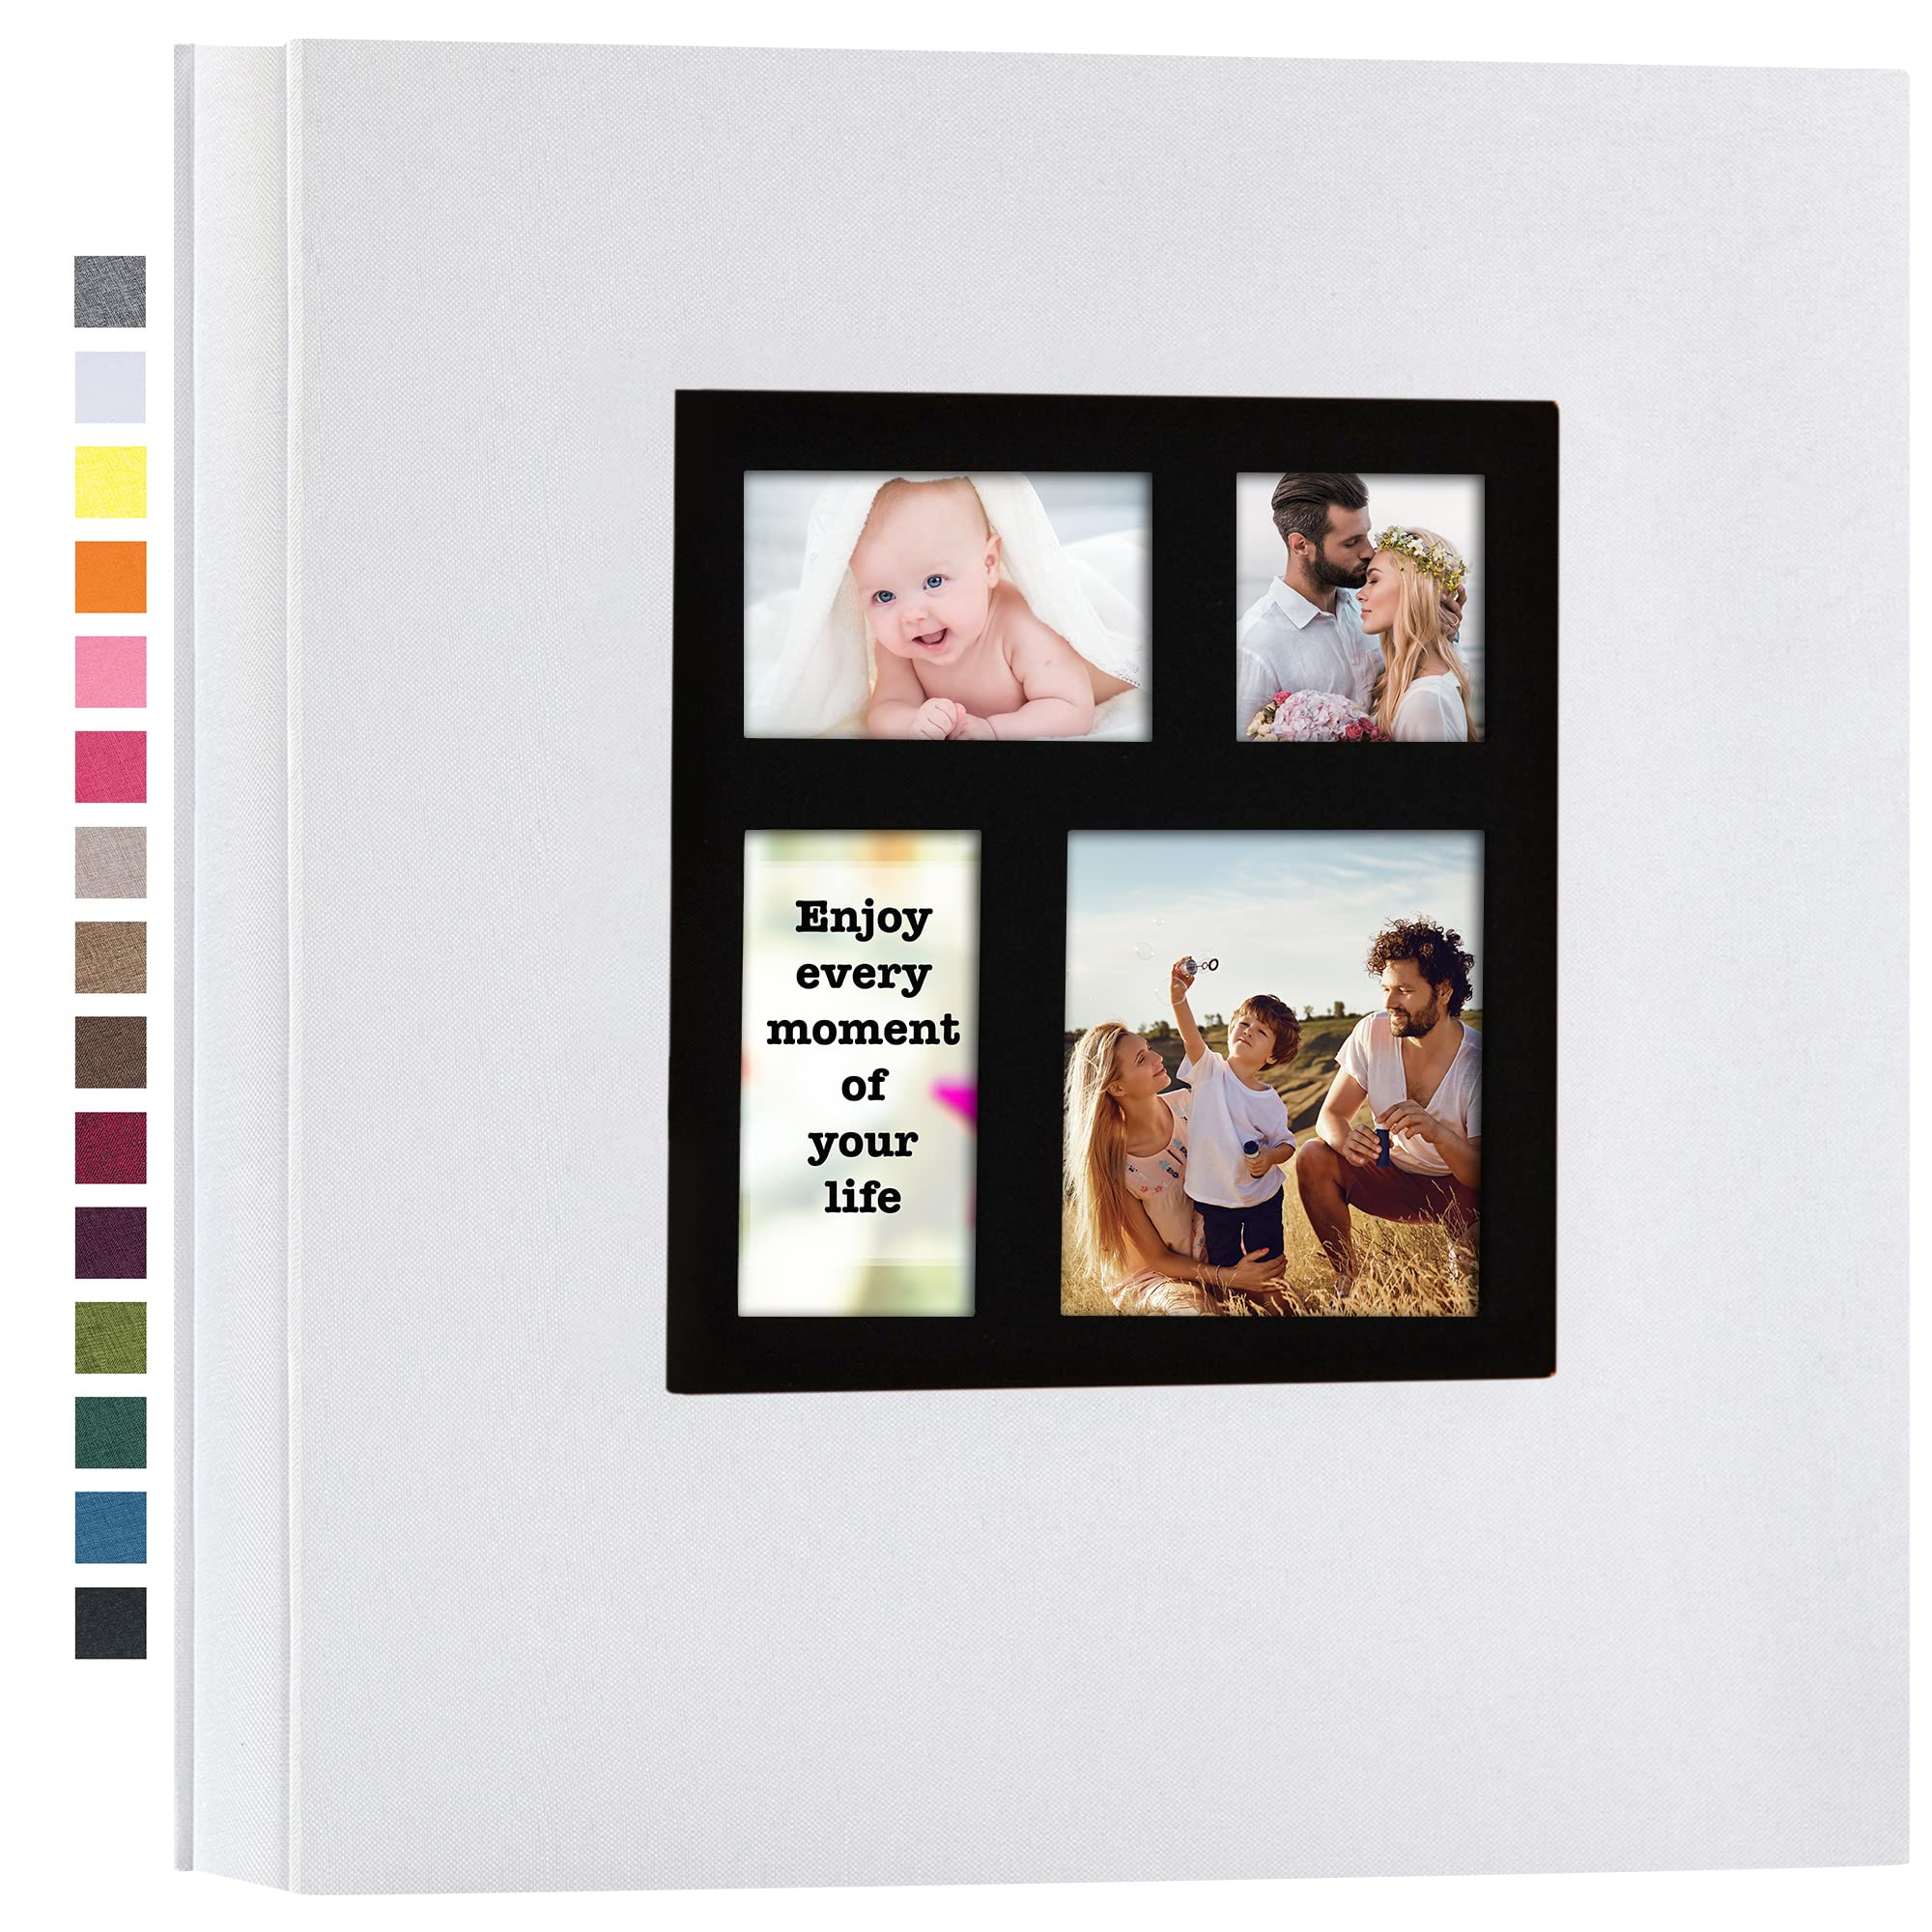 potricher Photo Album 4x6 1000 Photos Linen Hardcover Large Capacity for  Family Wedding Anniversary Baby Vacation (White, 1000 P